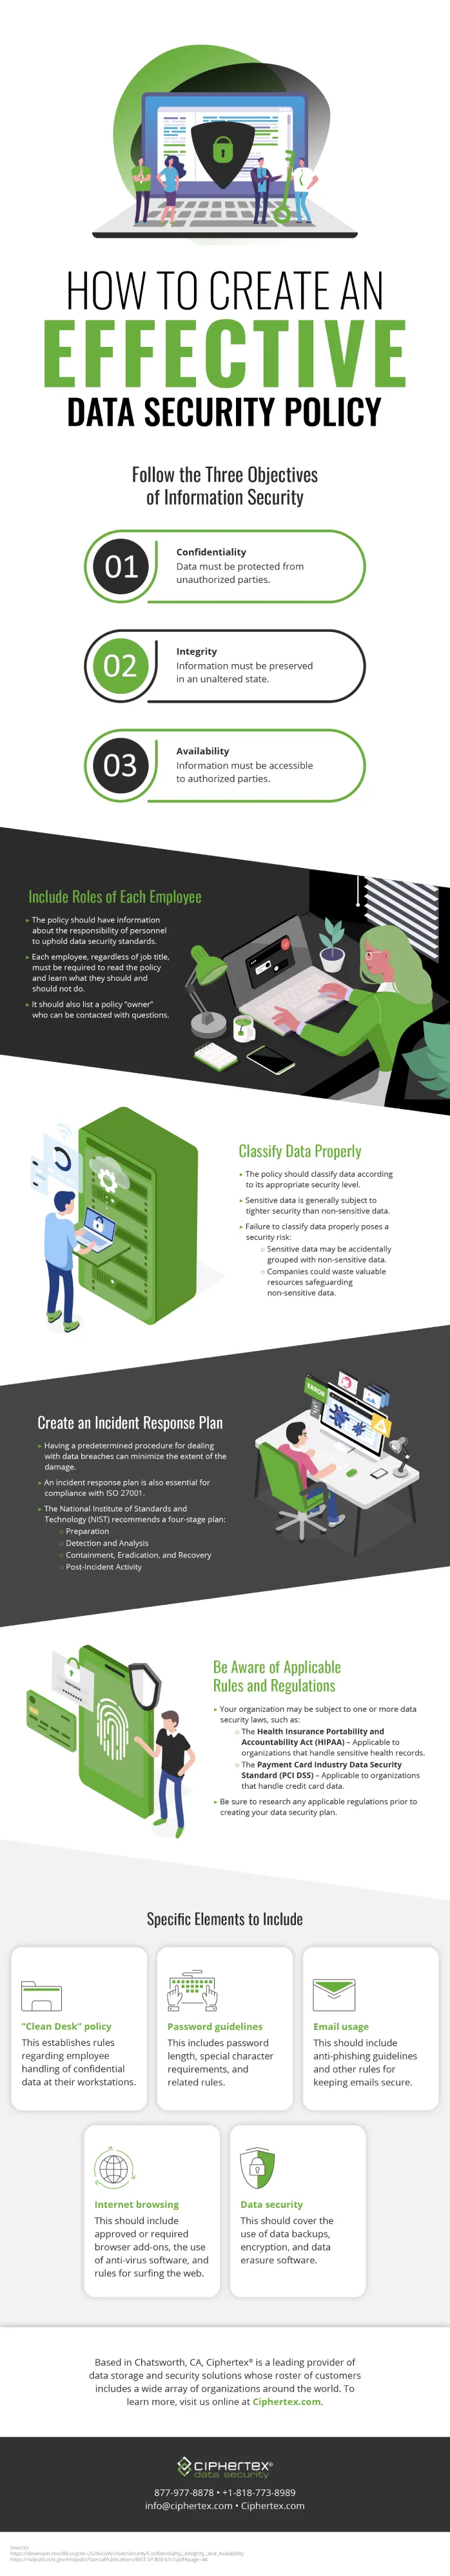 how-to-create-effective-data-security-policy-infographic-data-security-ciphertex-data-security-los-angeles-county